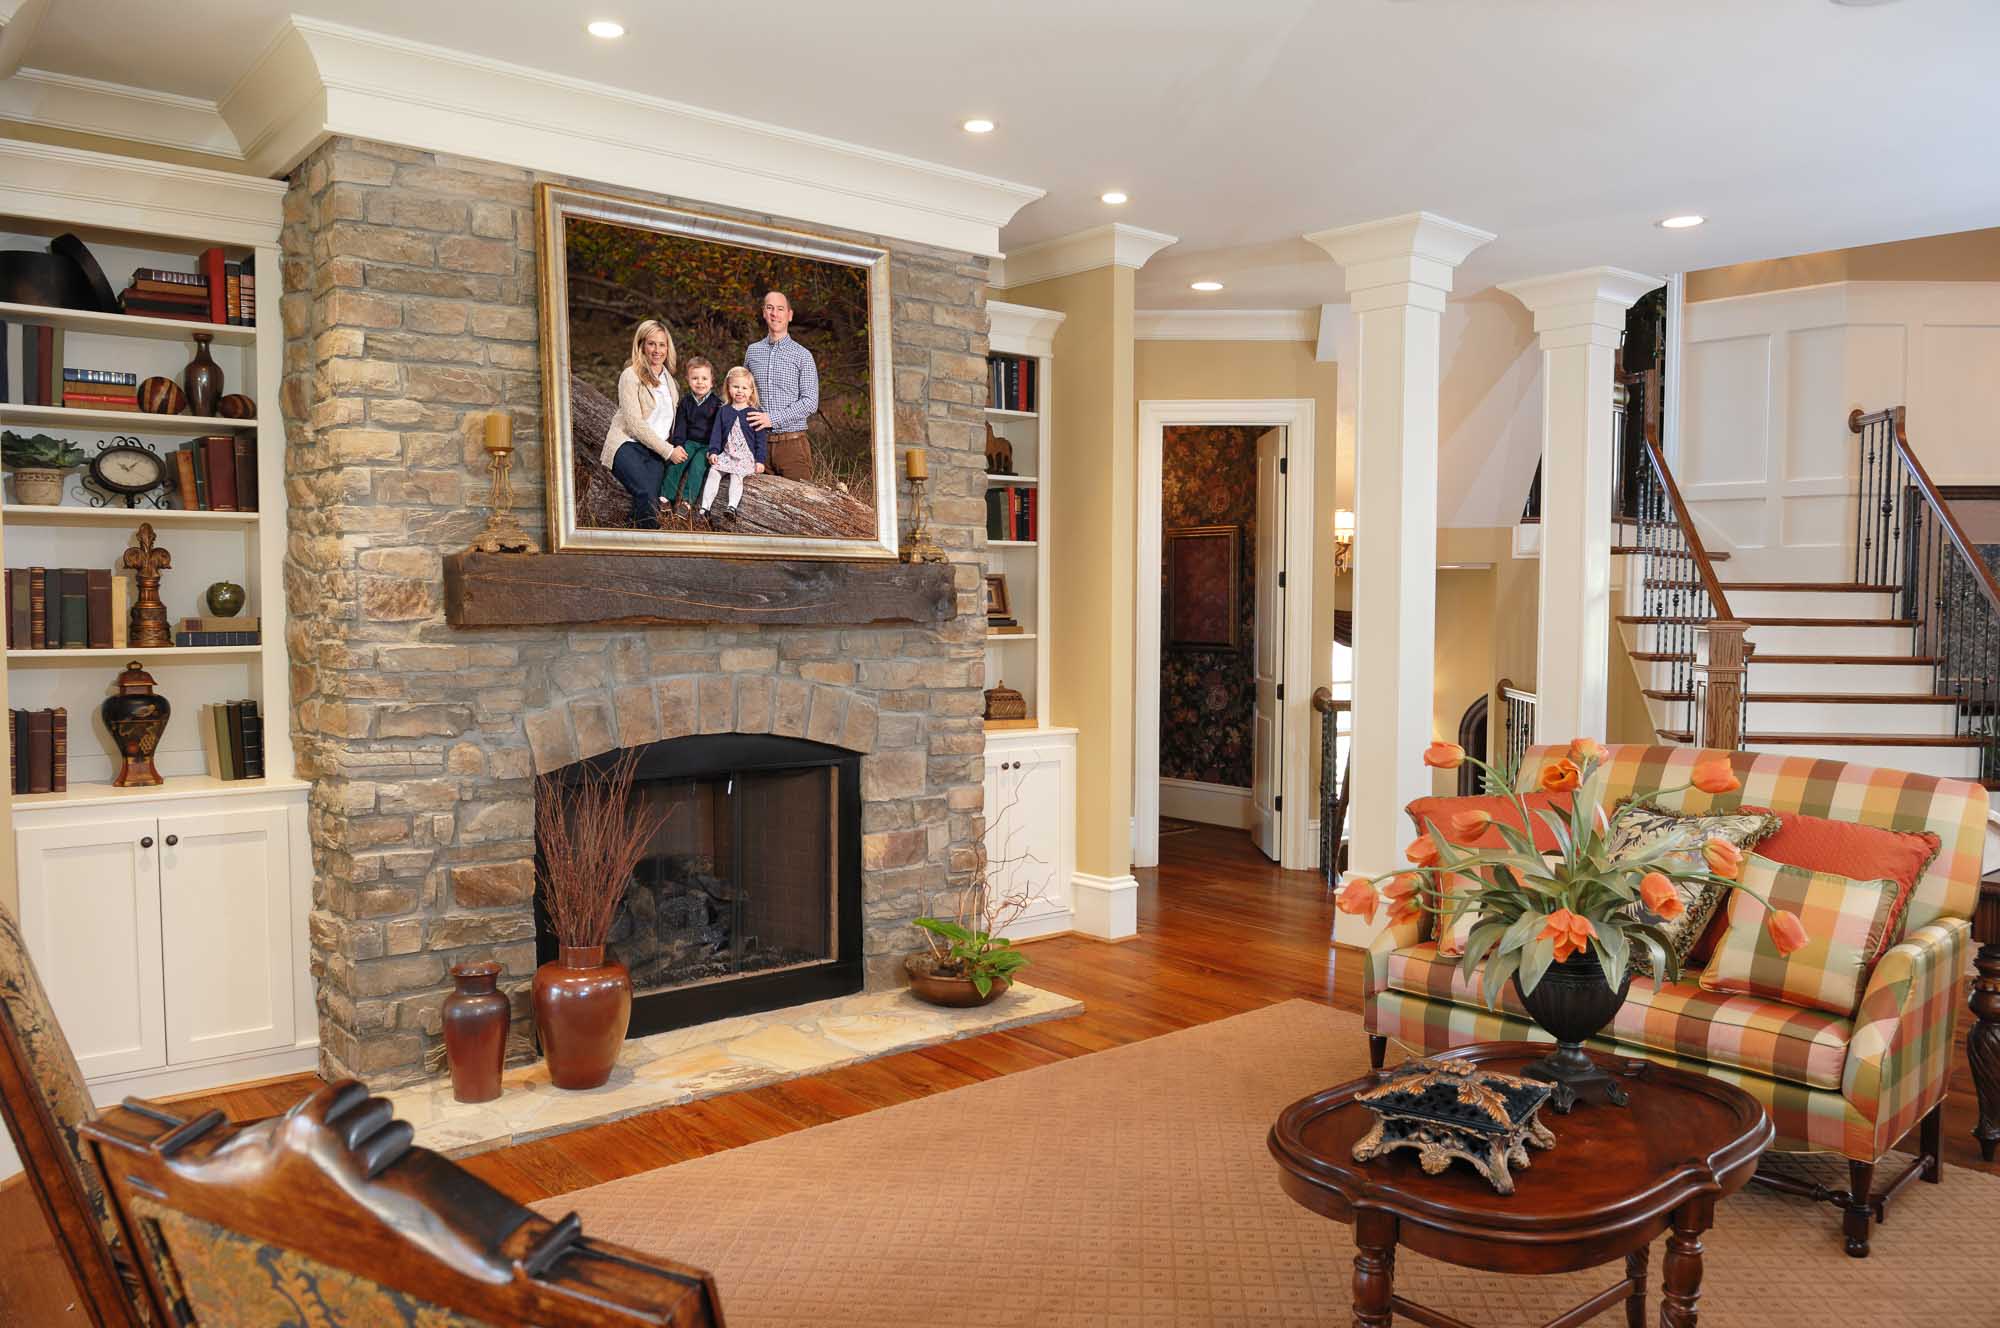 Full Living Room with Portrait over Fireplace | Lisa Maco Photography, Washington, DC